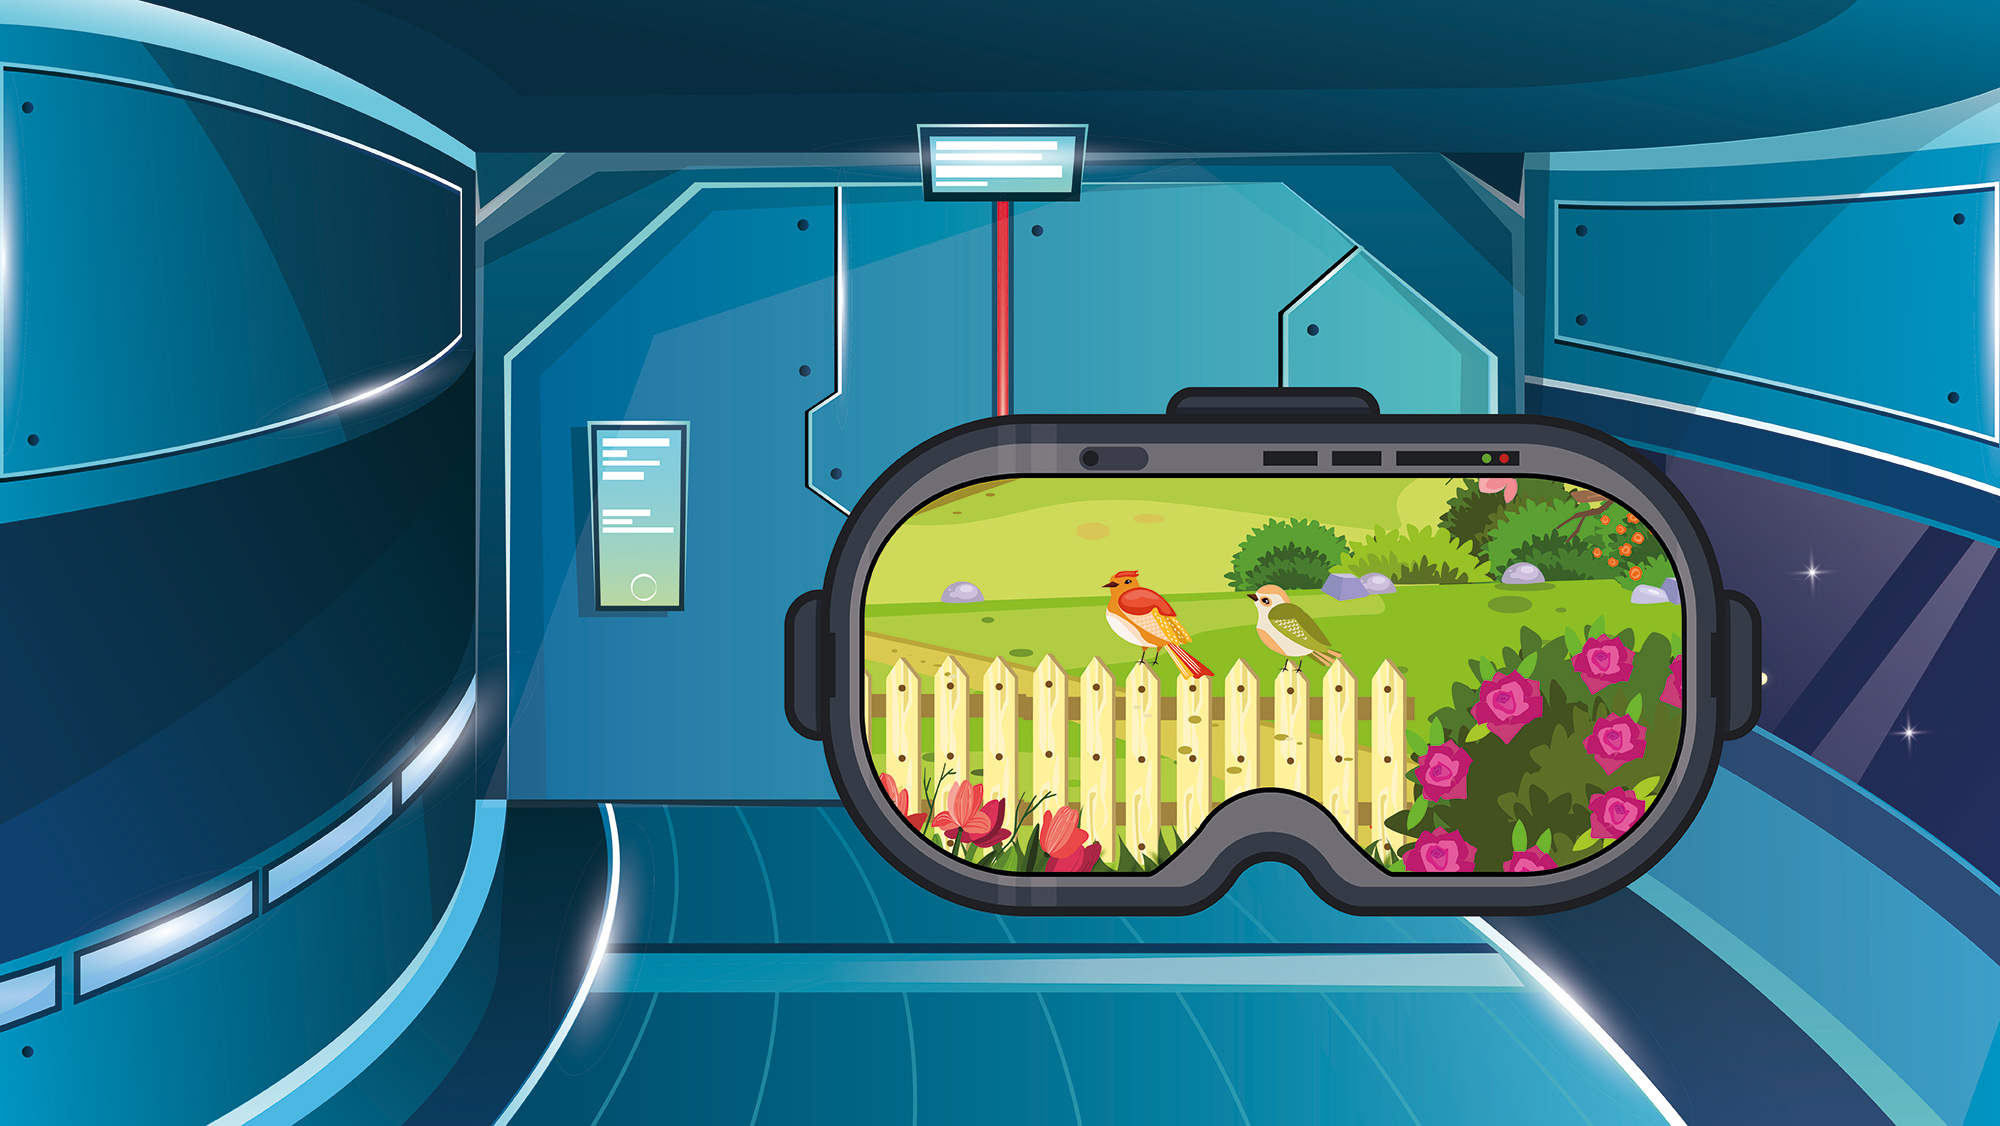 A digitally rendered image of a VR headset showing a nature scene.